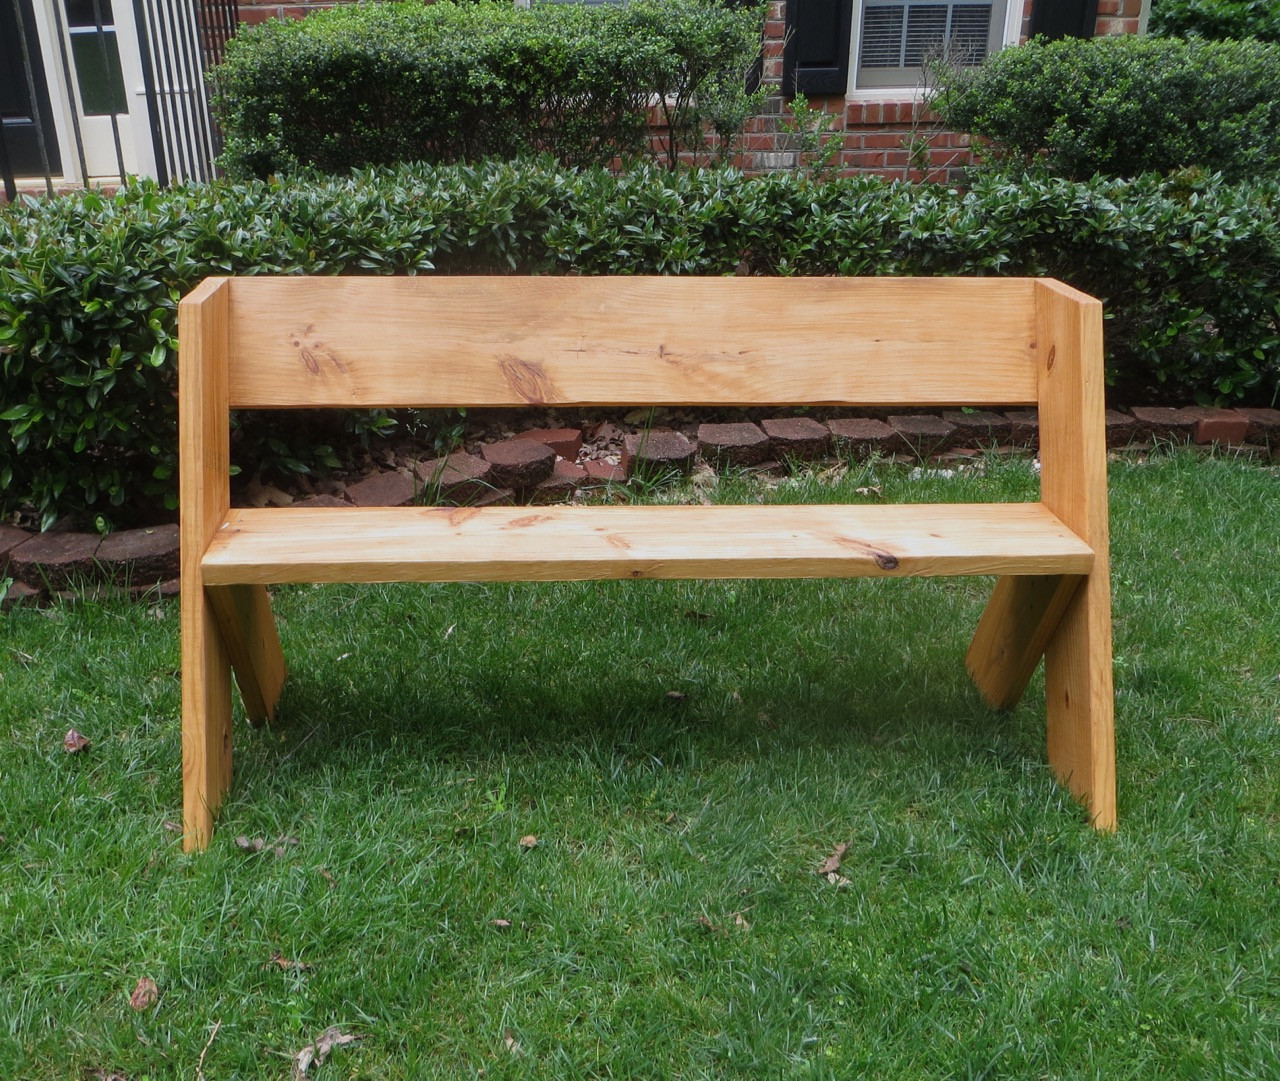 DIY Outdoor Wooden Benches
 The Project Lady DIY Tutorial – $16 Simple Outdoor Wood